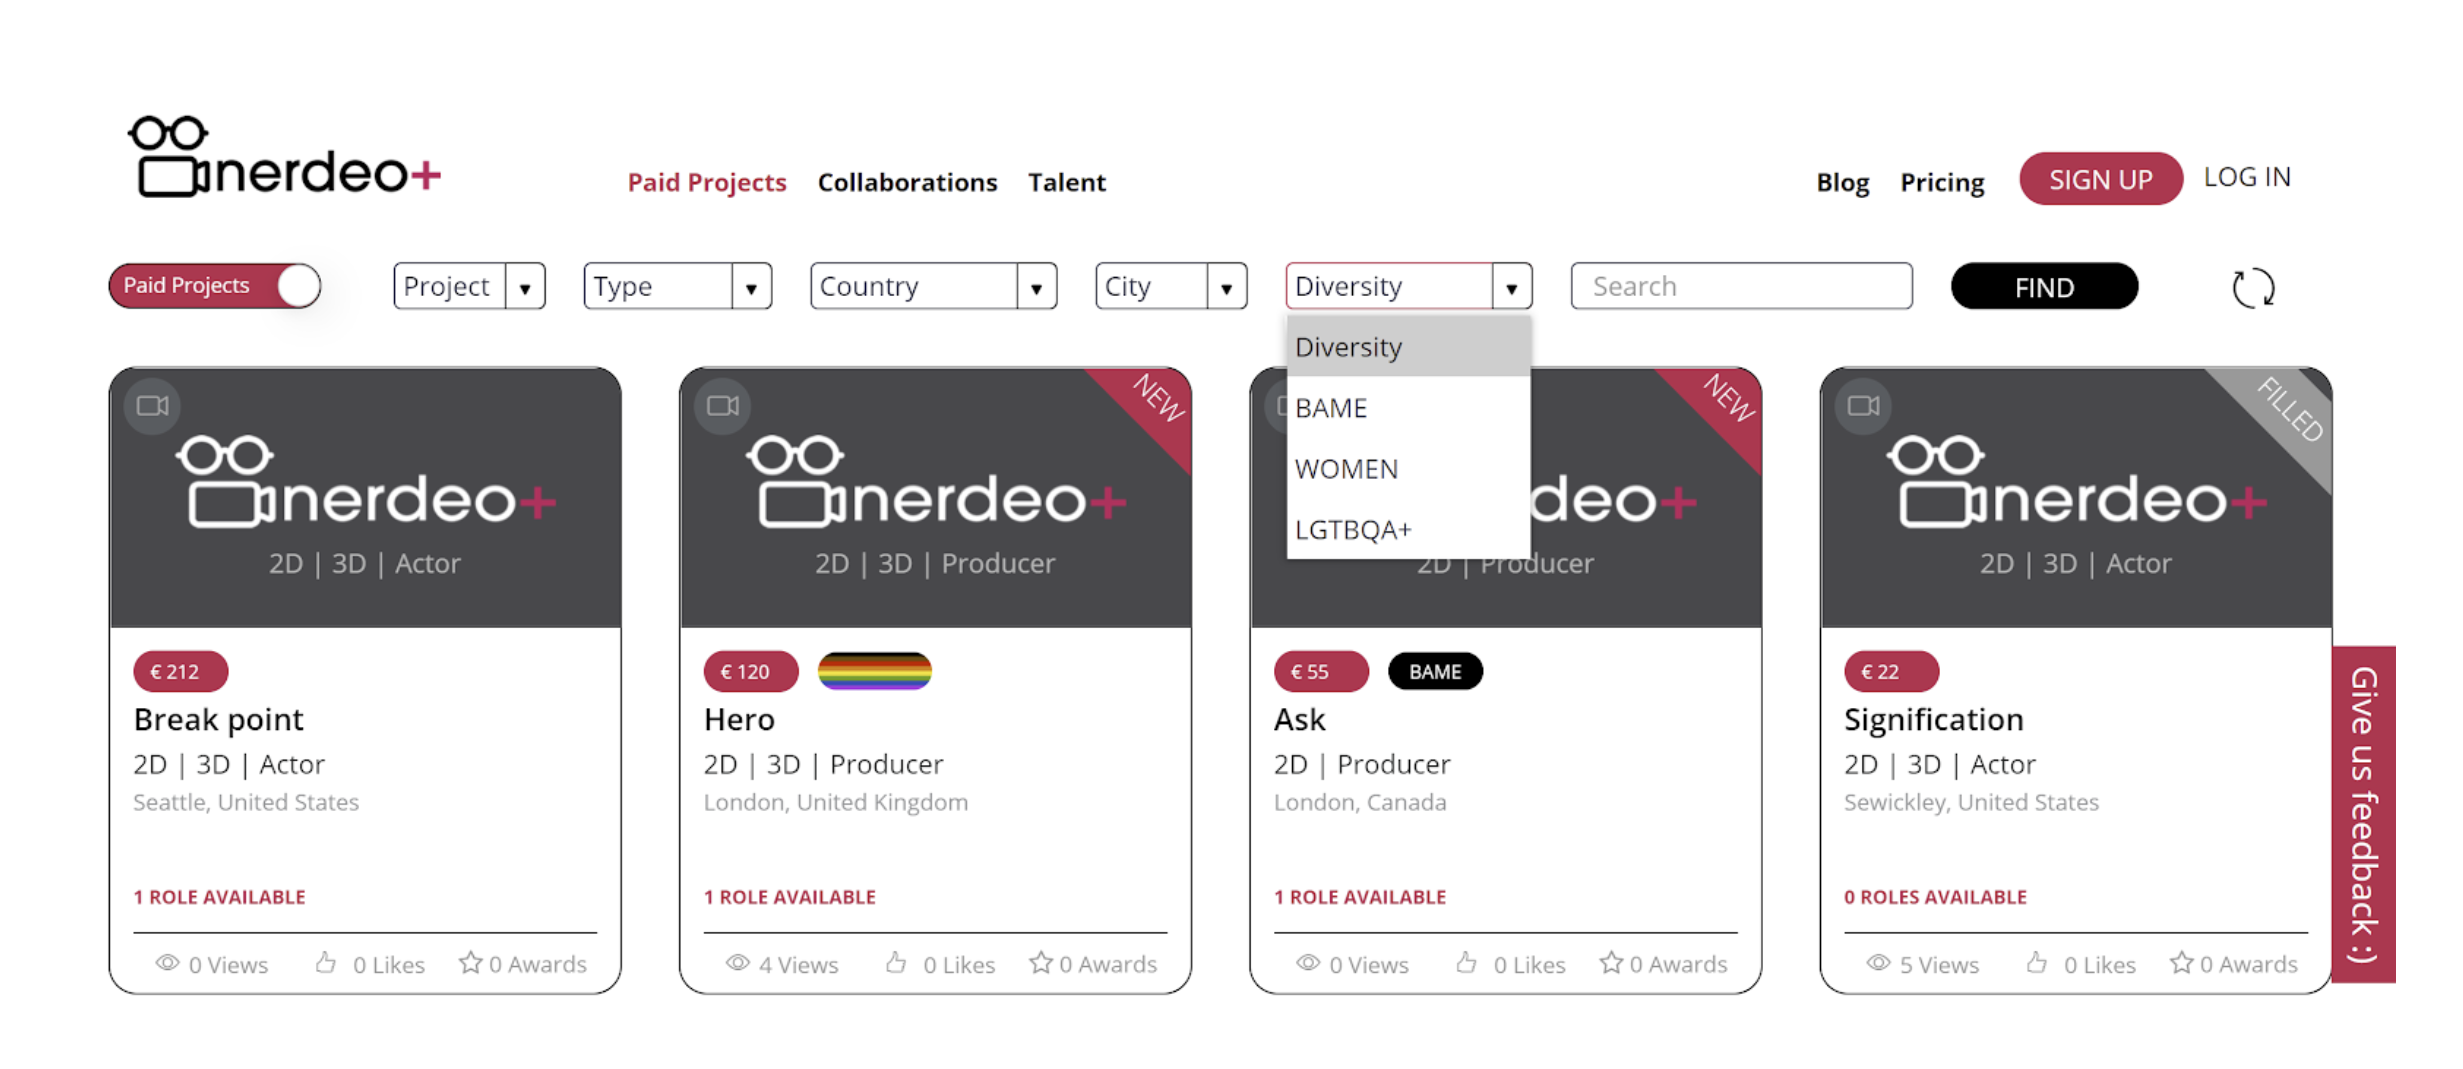 Nerdeo Launches BAME, LGBTQA+ & Women Filters For Projects